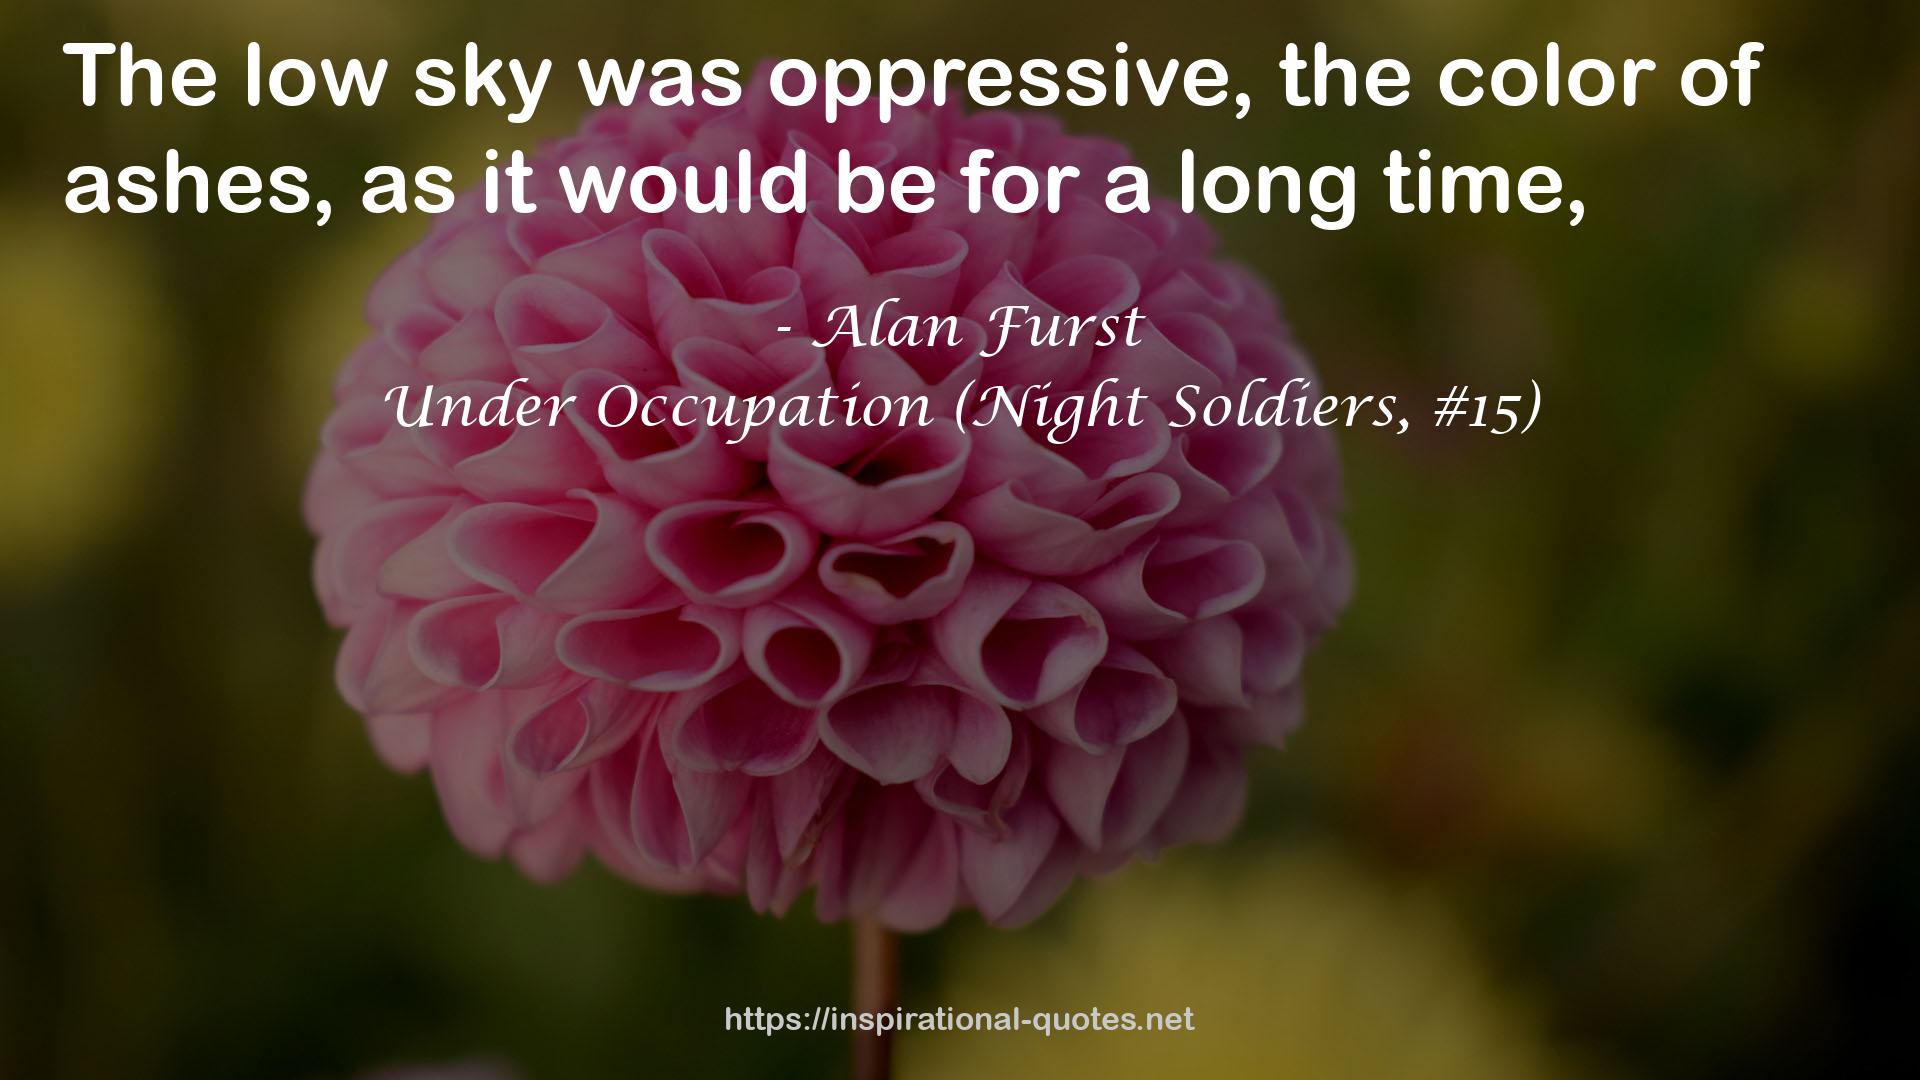 Under Occupation (Night Soldiers, #15) QUOTES